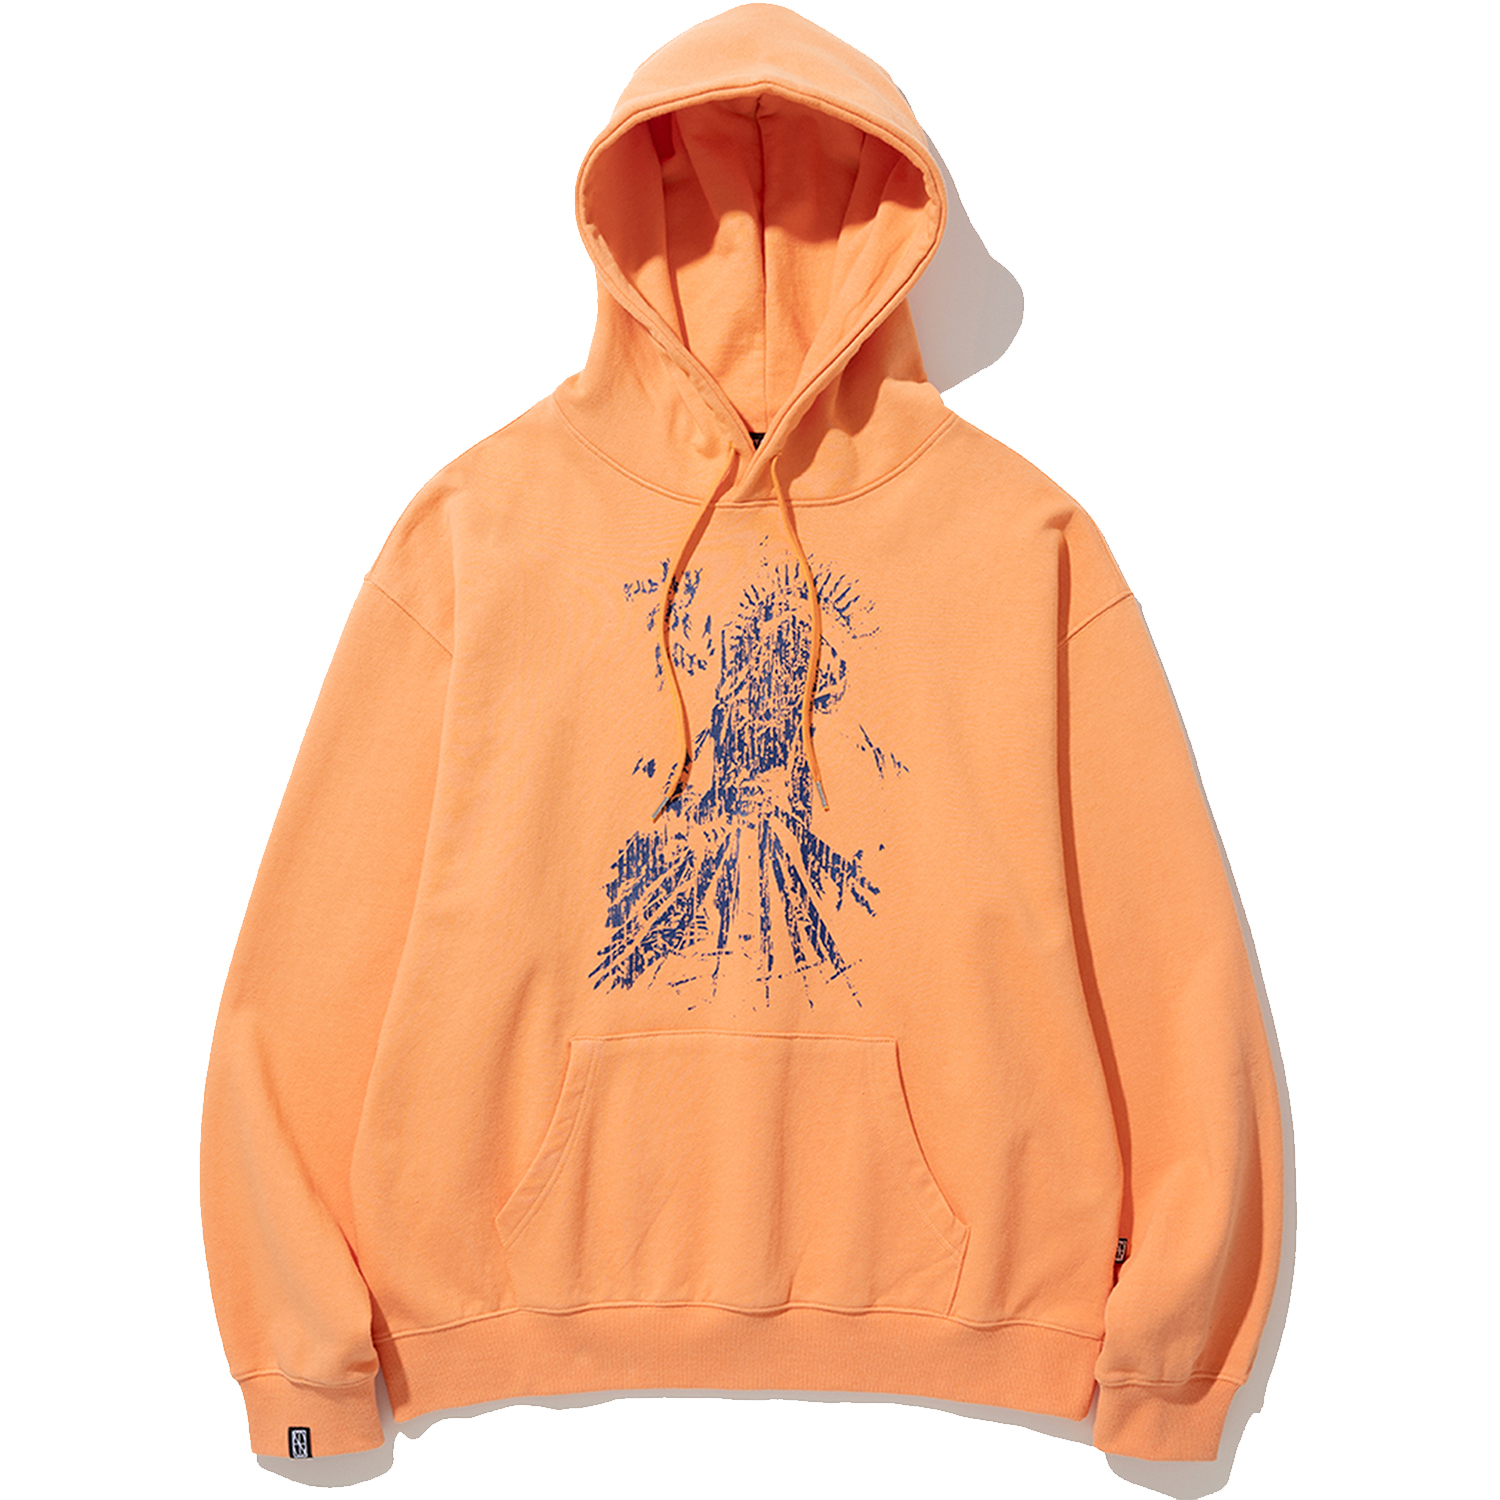 Why The Hate Pullover Hood - Orange,NOT4NERD